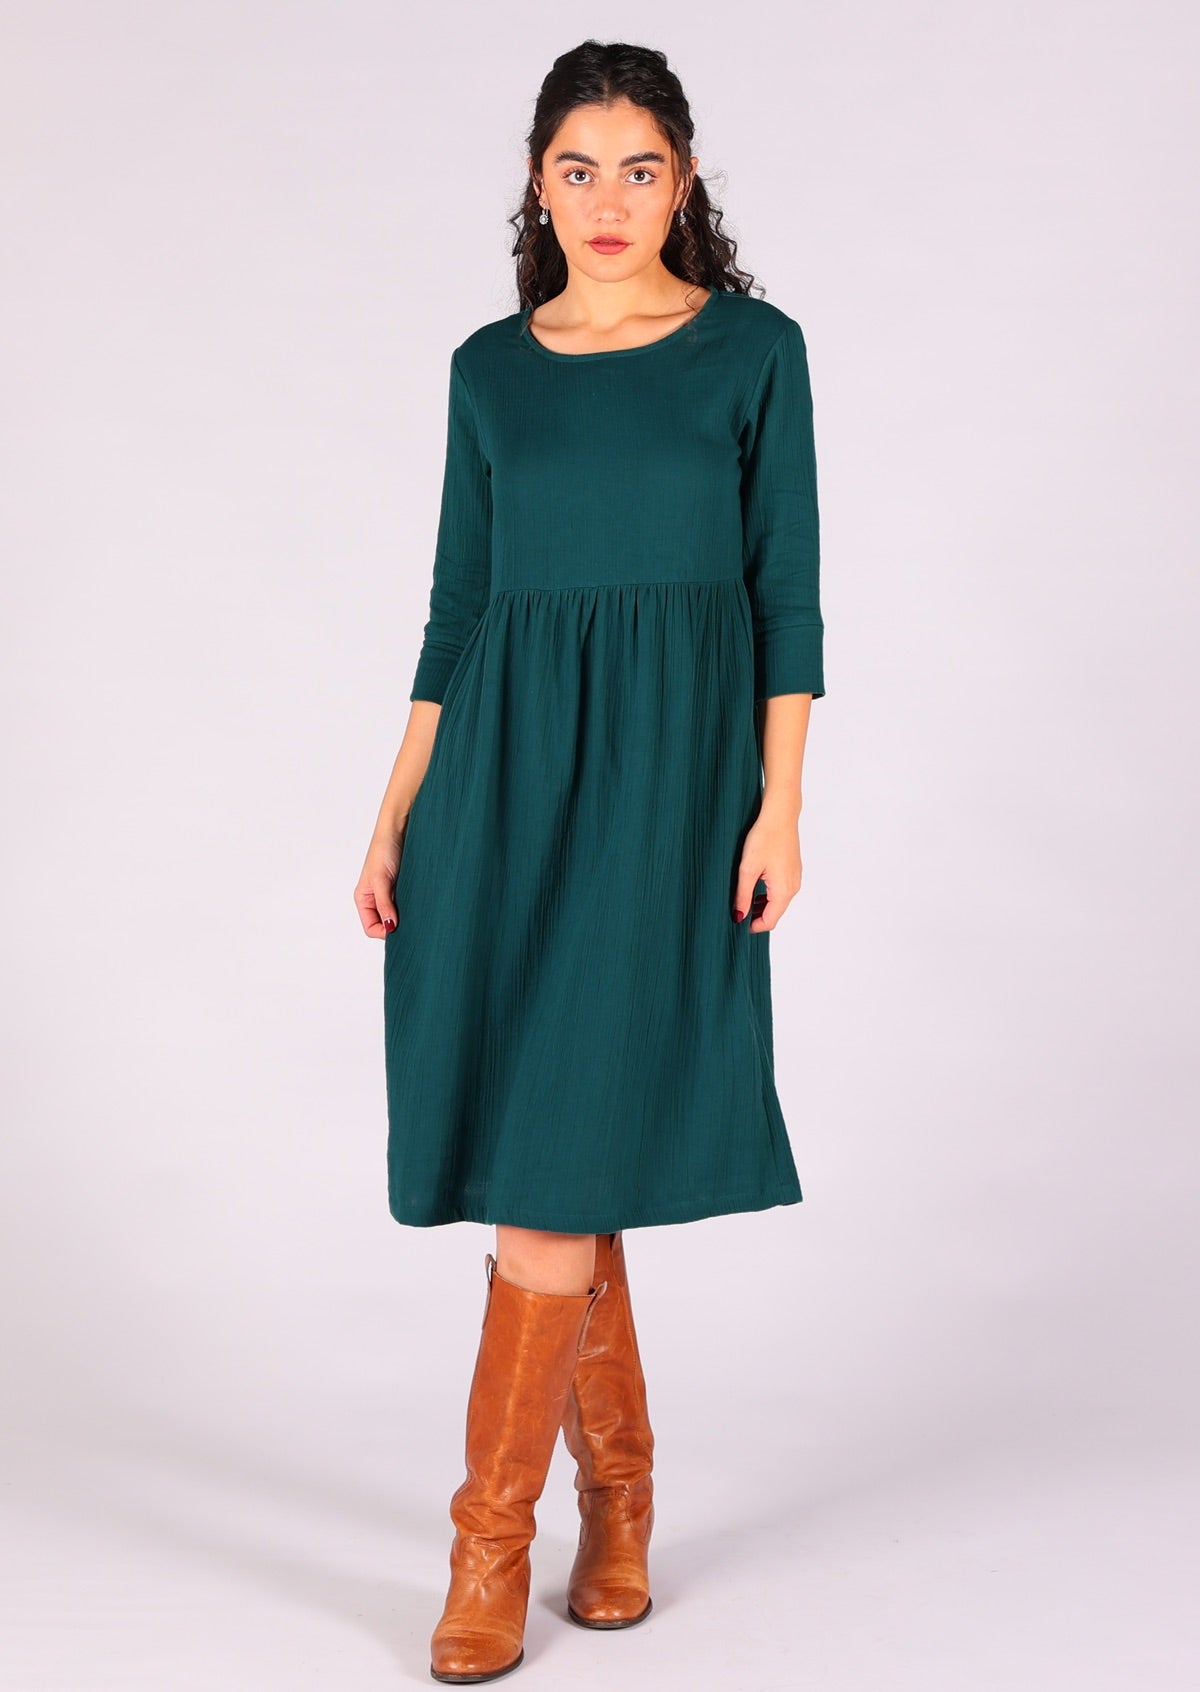 Double cotton 3/4 sleeve relaxed fit dress with round neckline